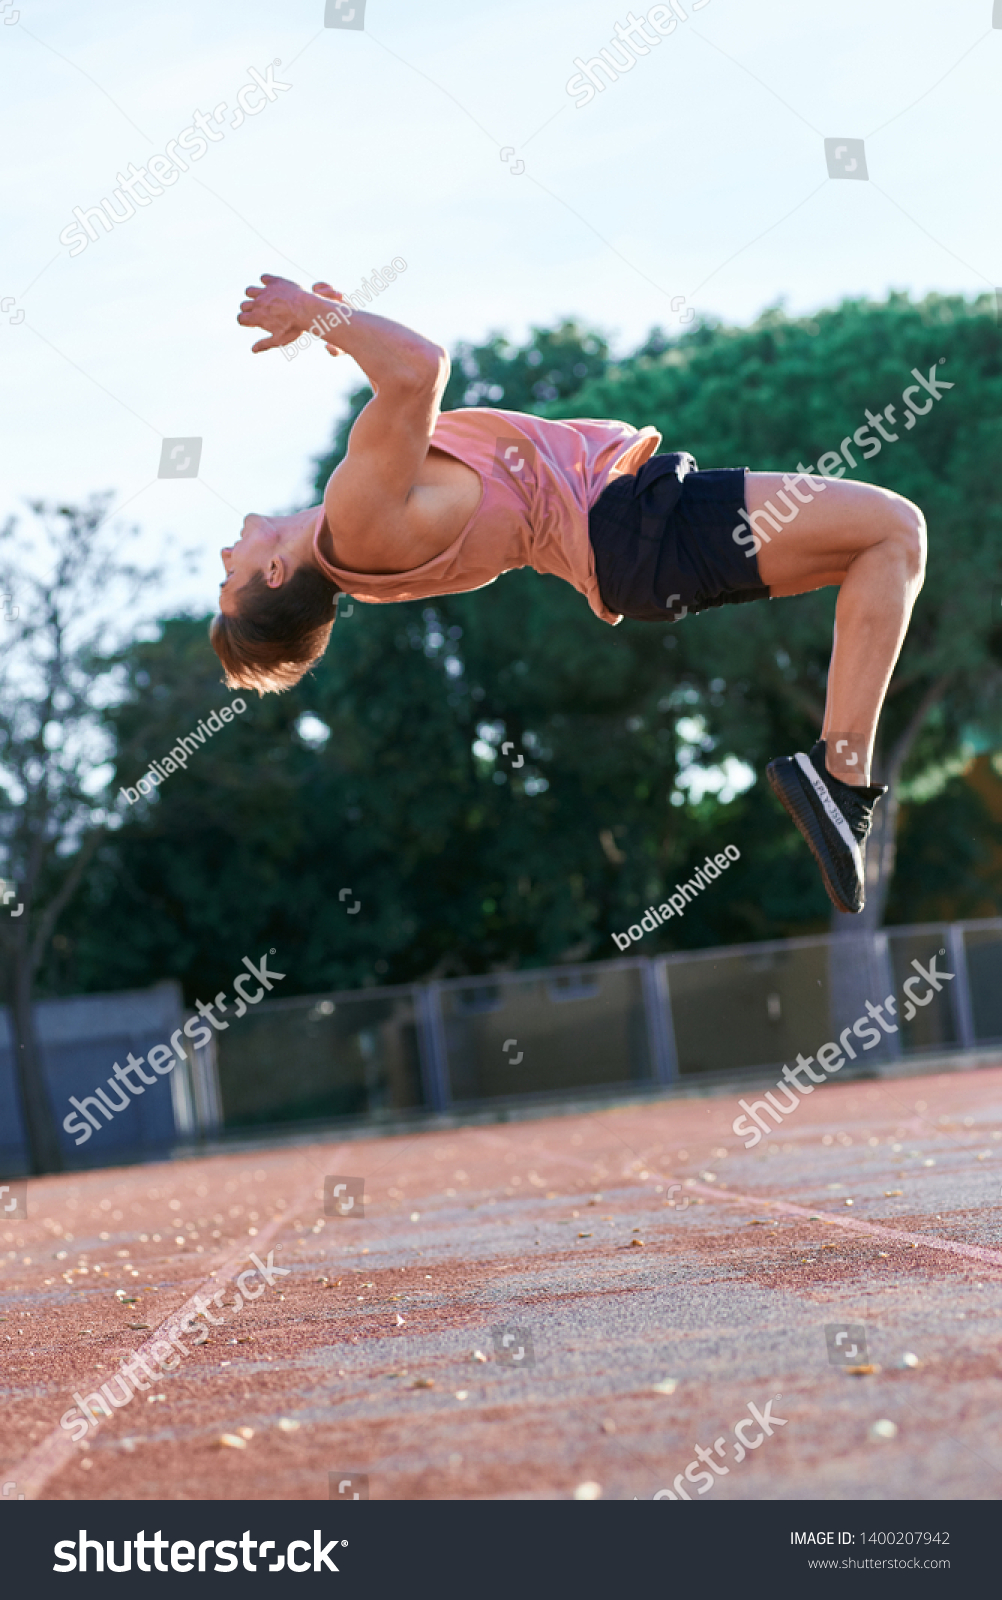 A young boy leaping somersault on the stadium. Copy space. Man athlete doing exercises outdoors. #1400207942